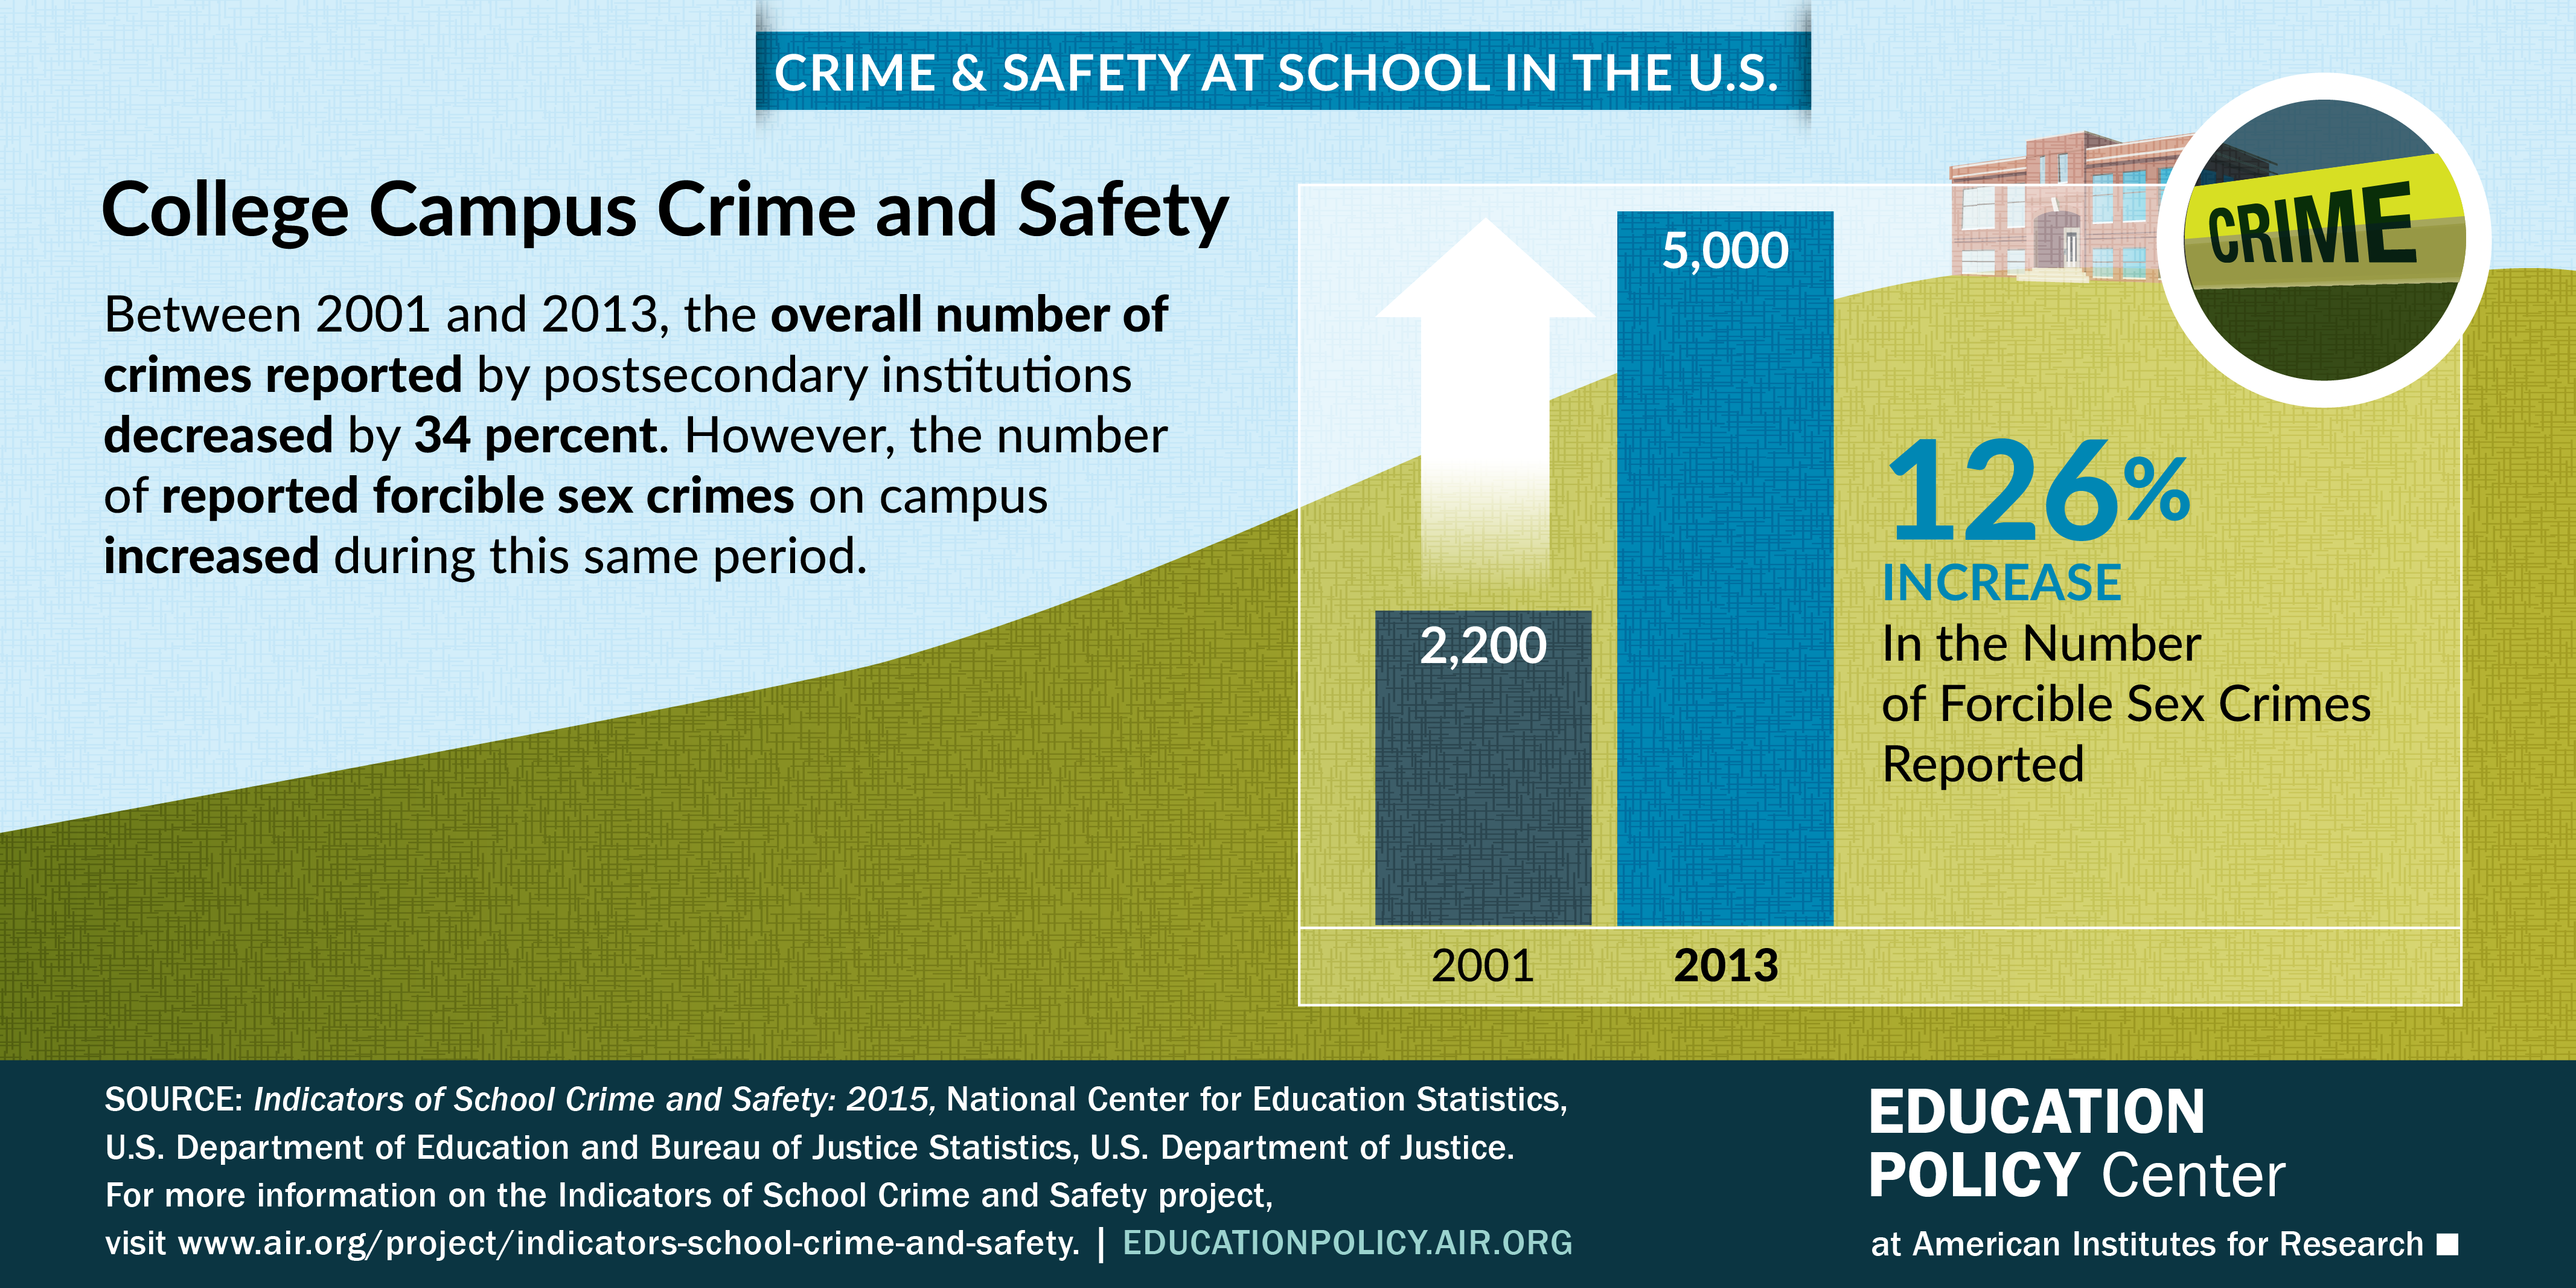 Infographic shows the overall number of crimes reported by postsecondary institutions decreased by 34% between 2001 and 2013. However, the number of reported forcible sex crimes on campus increased during this same period.